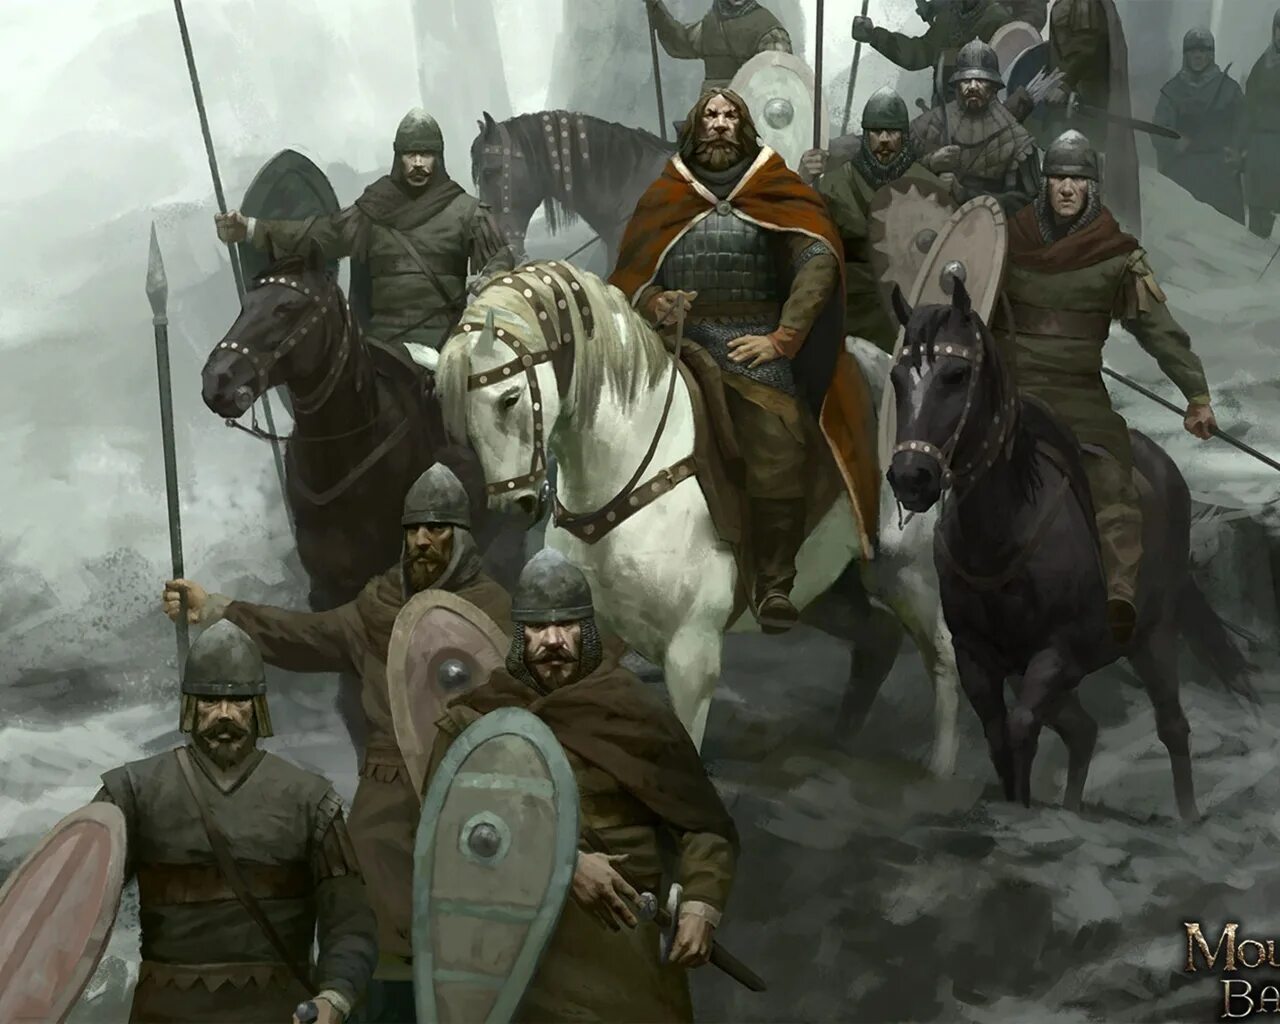 Mount and Blade 2. Mb2 Bannerlord. Mount and Blade 2 Bannerlord арт. Mount & Blade II: Bannerlord Art.